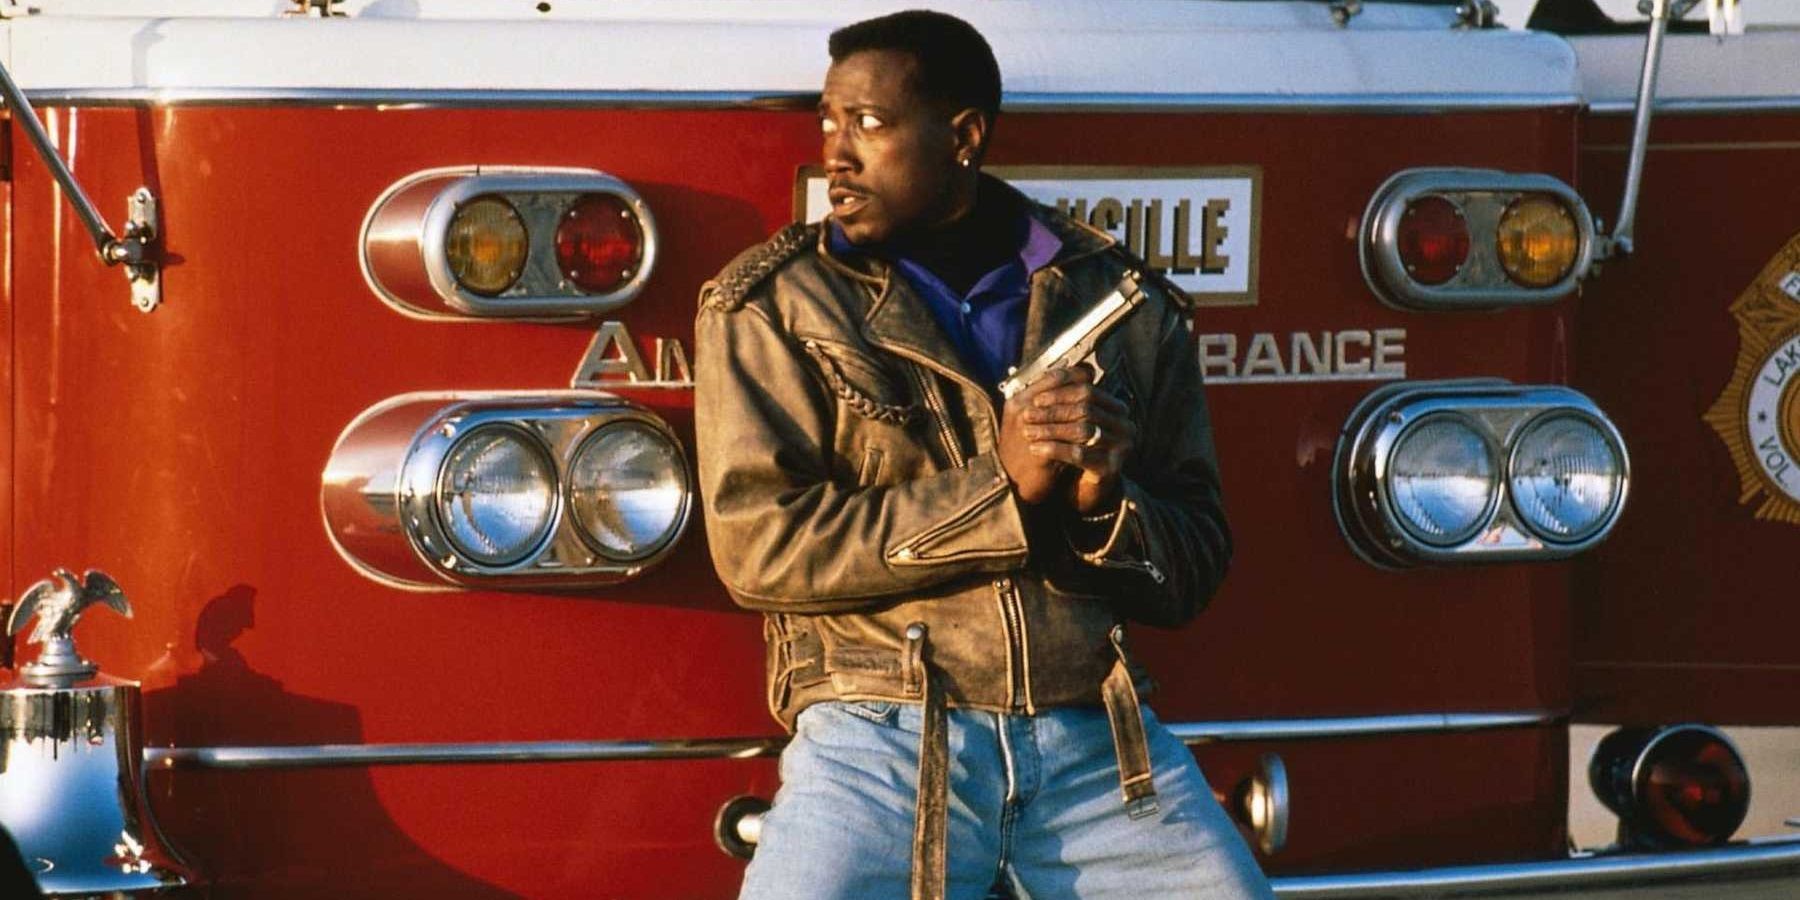 Wesley Snipes holding a gun next to a fire truck in in Passenger 57